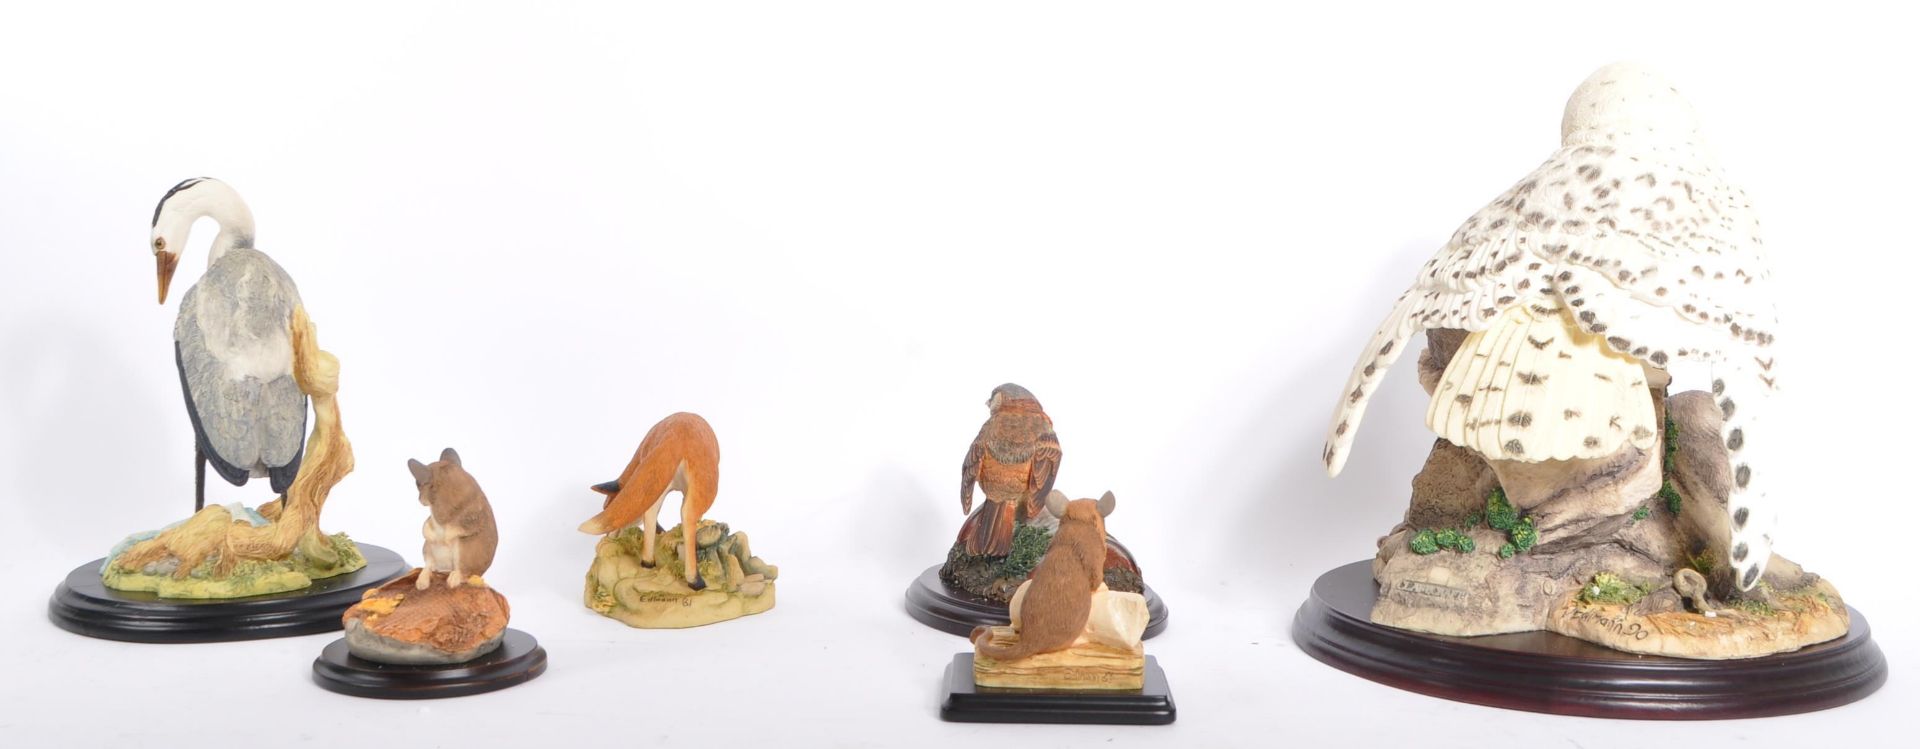 COLLECTION OF VINTAGE TEVIOTDALE RESIN ANIMAL FIGURES - Image 7 of 7